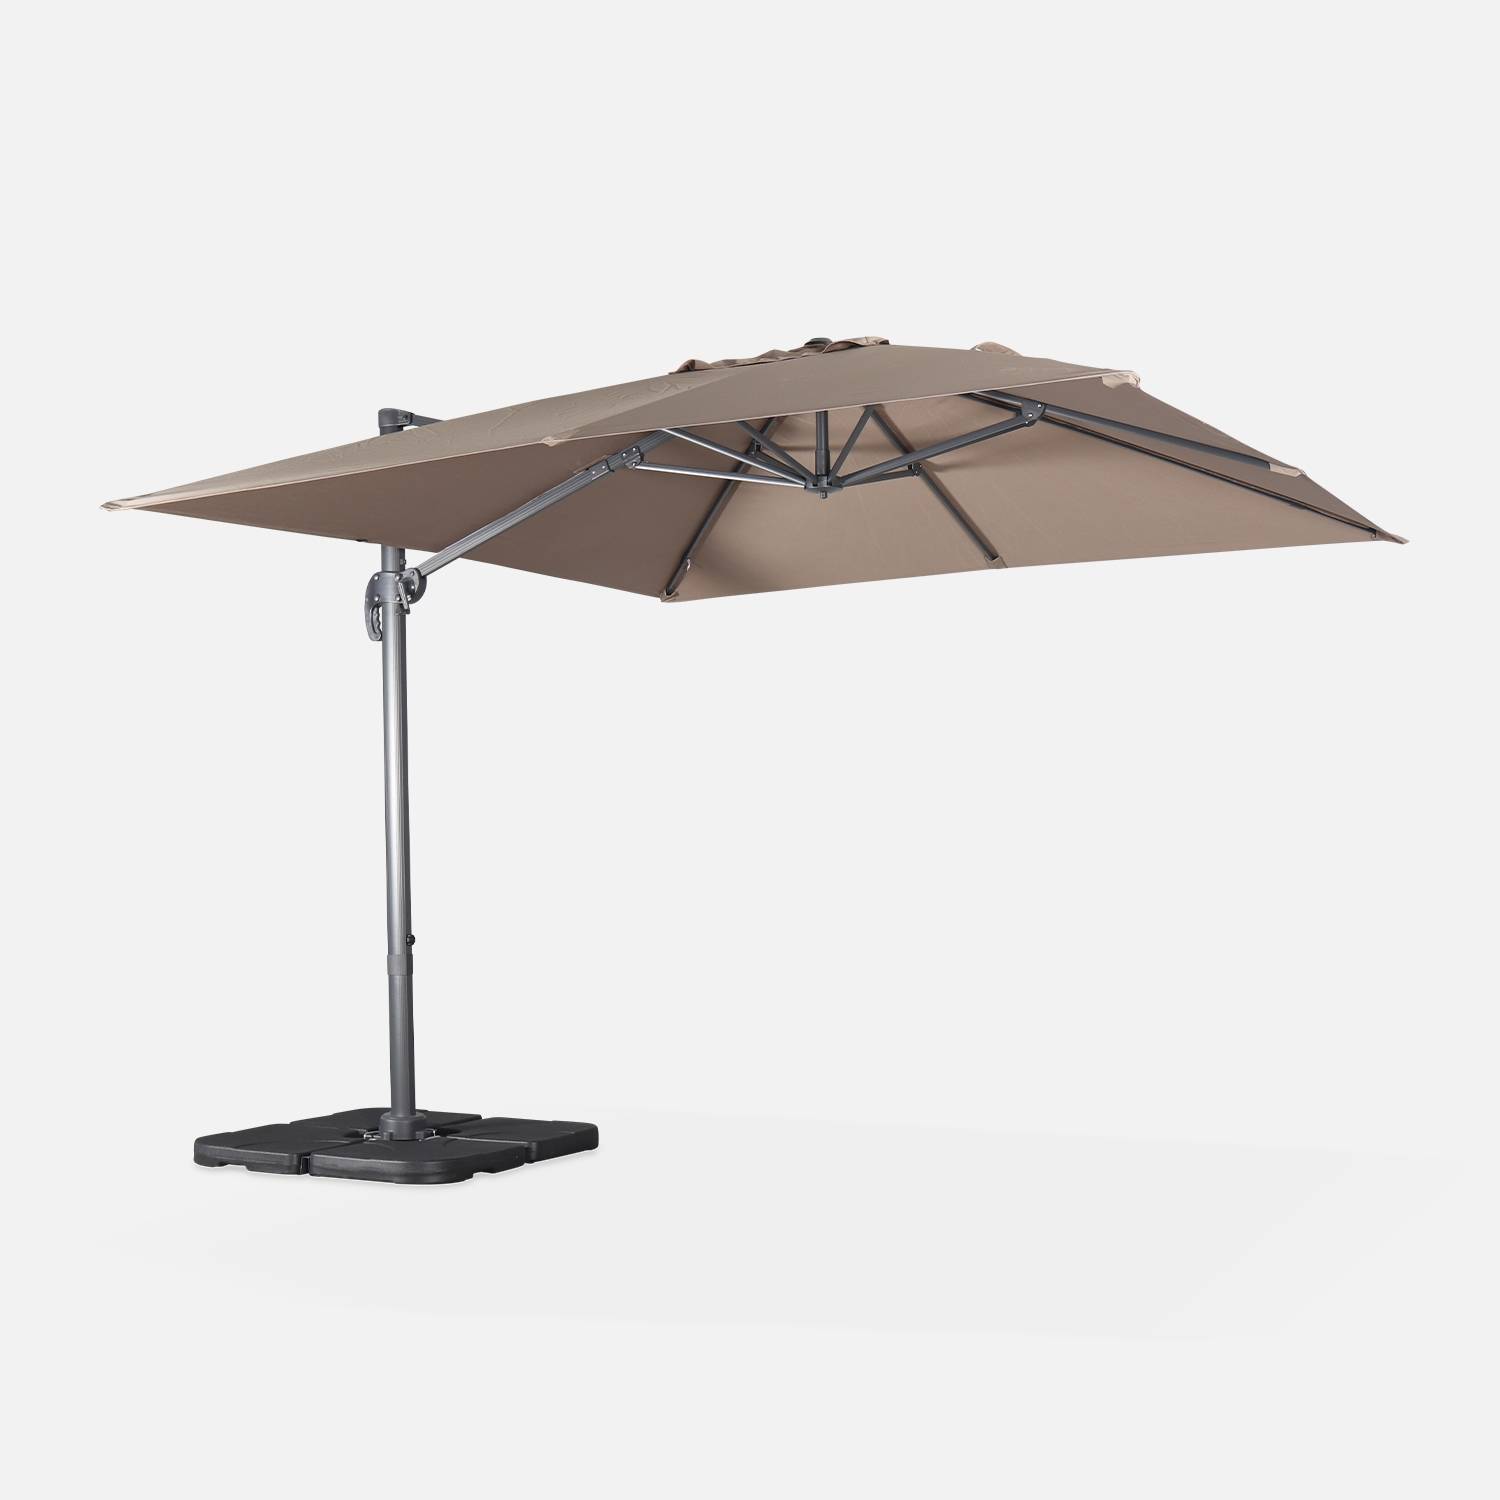 3x3m cantilever parasol + 50x50cm weighted slabs with protected cover included, Beige-brown